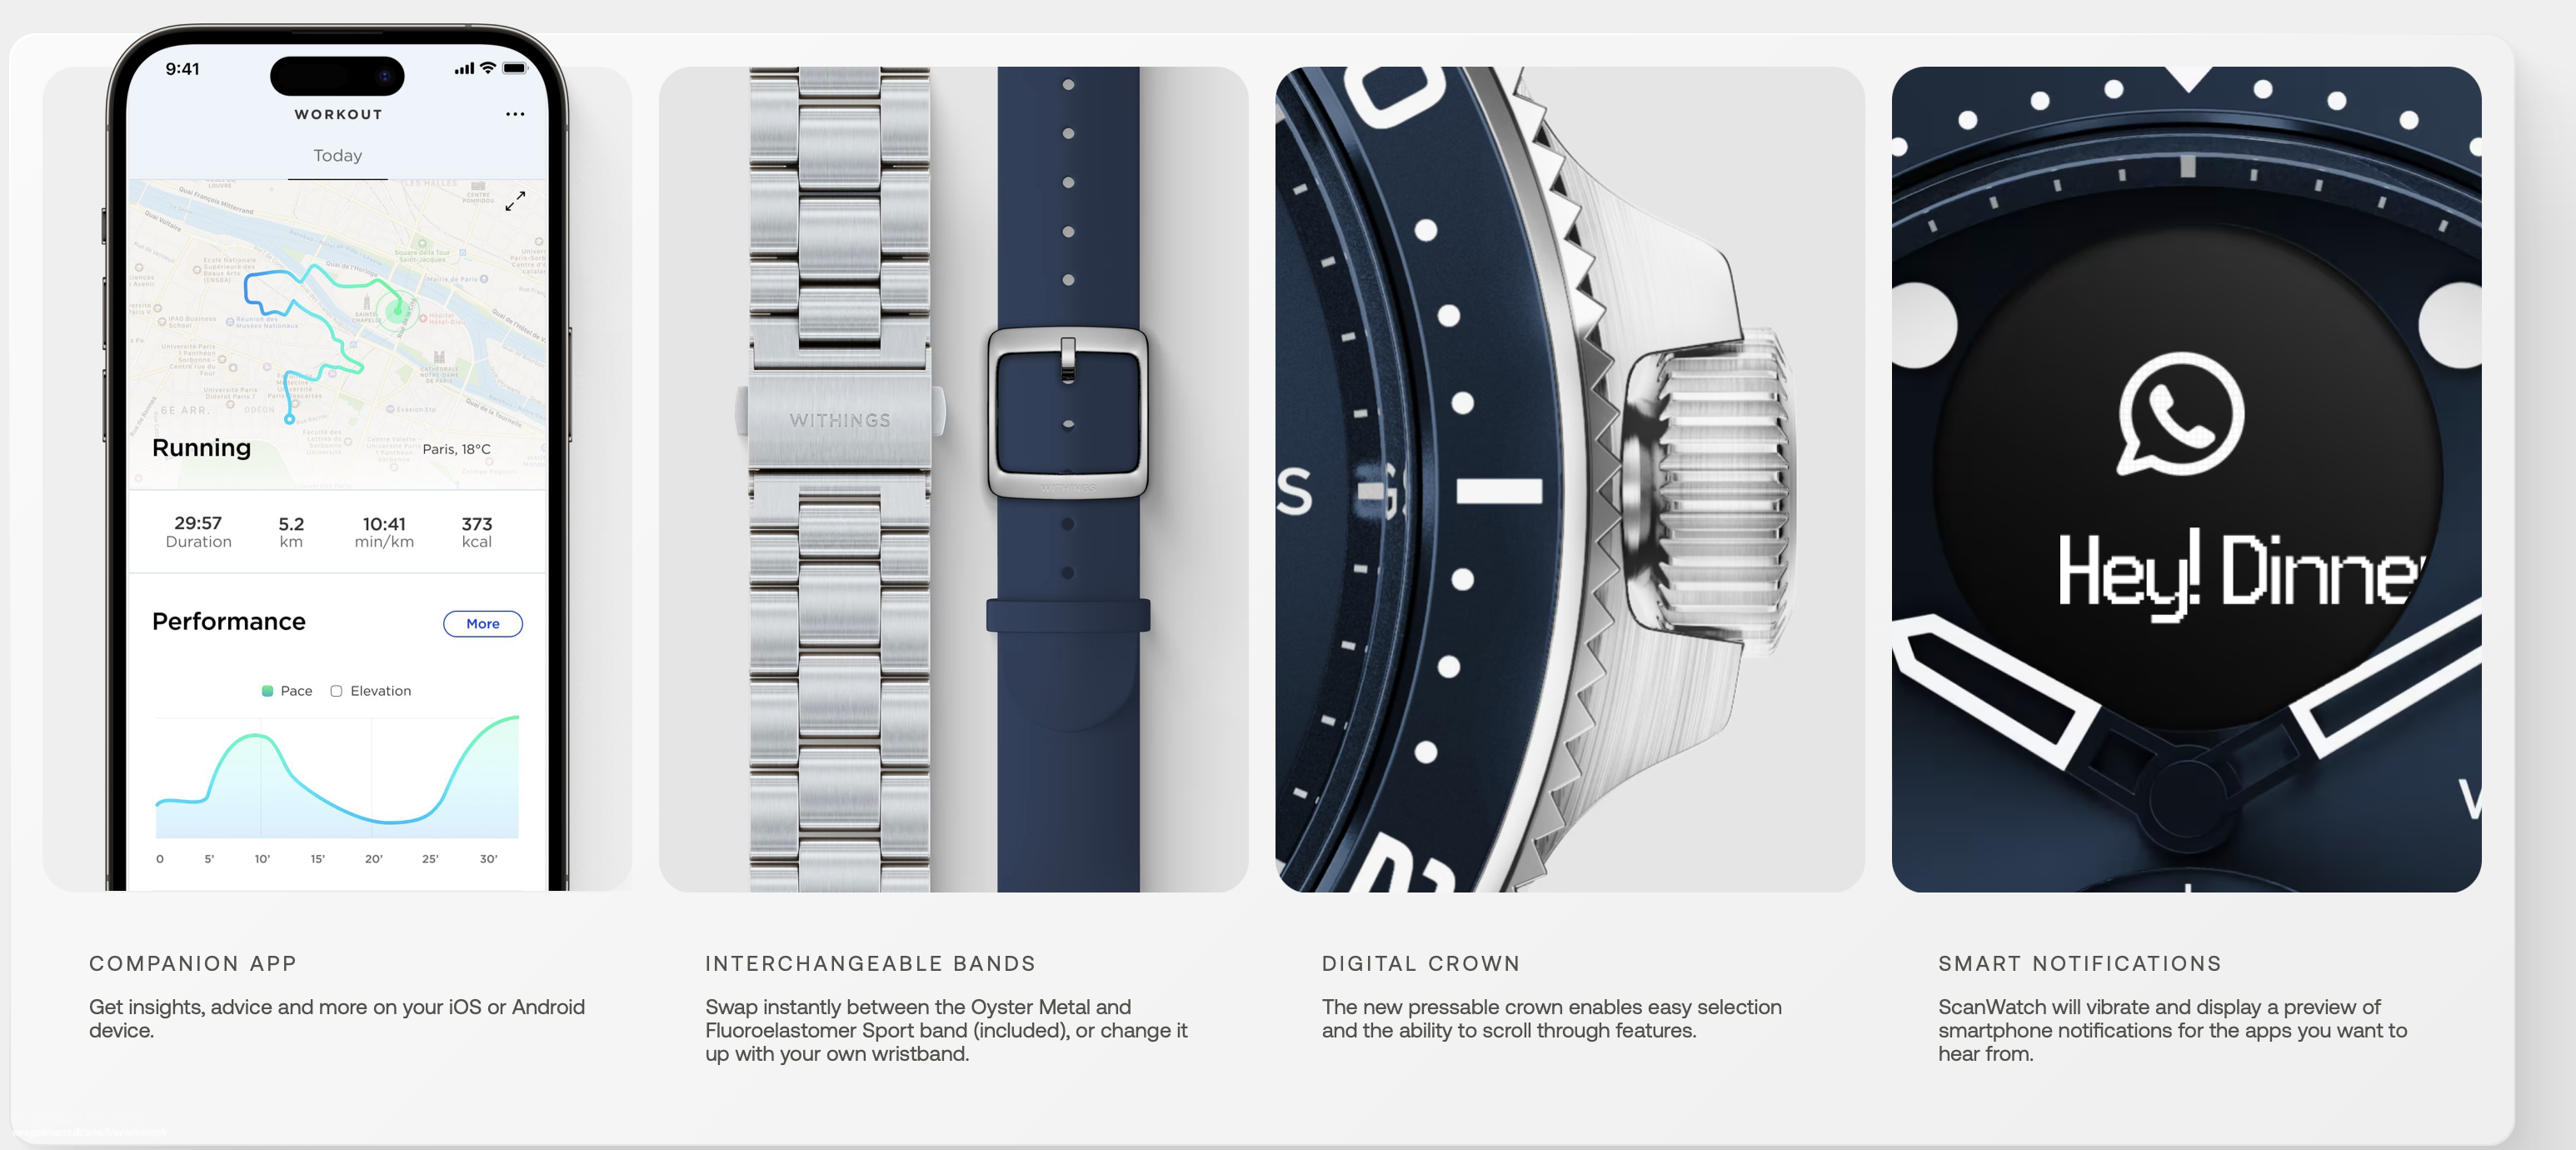 Withings ScanWatch Horizon